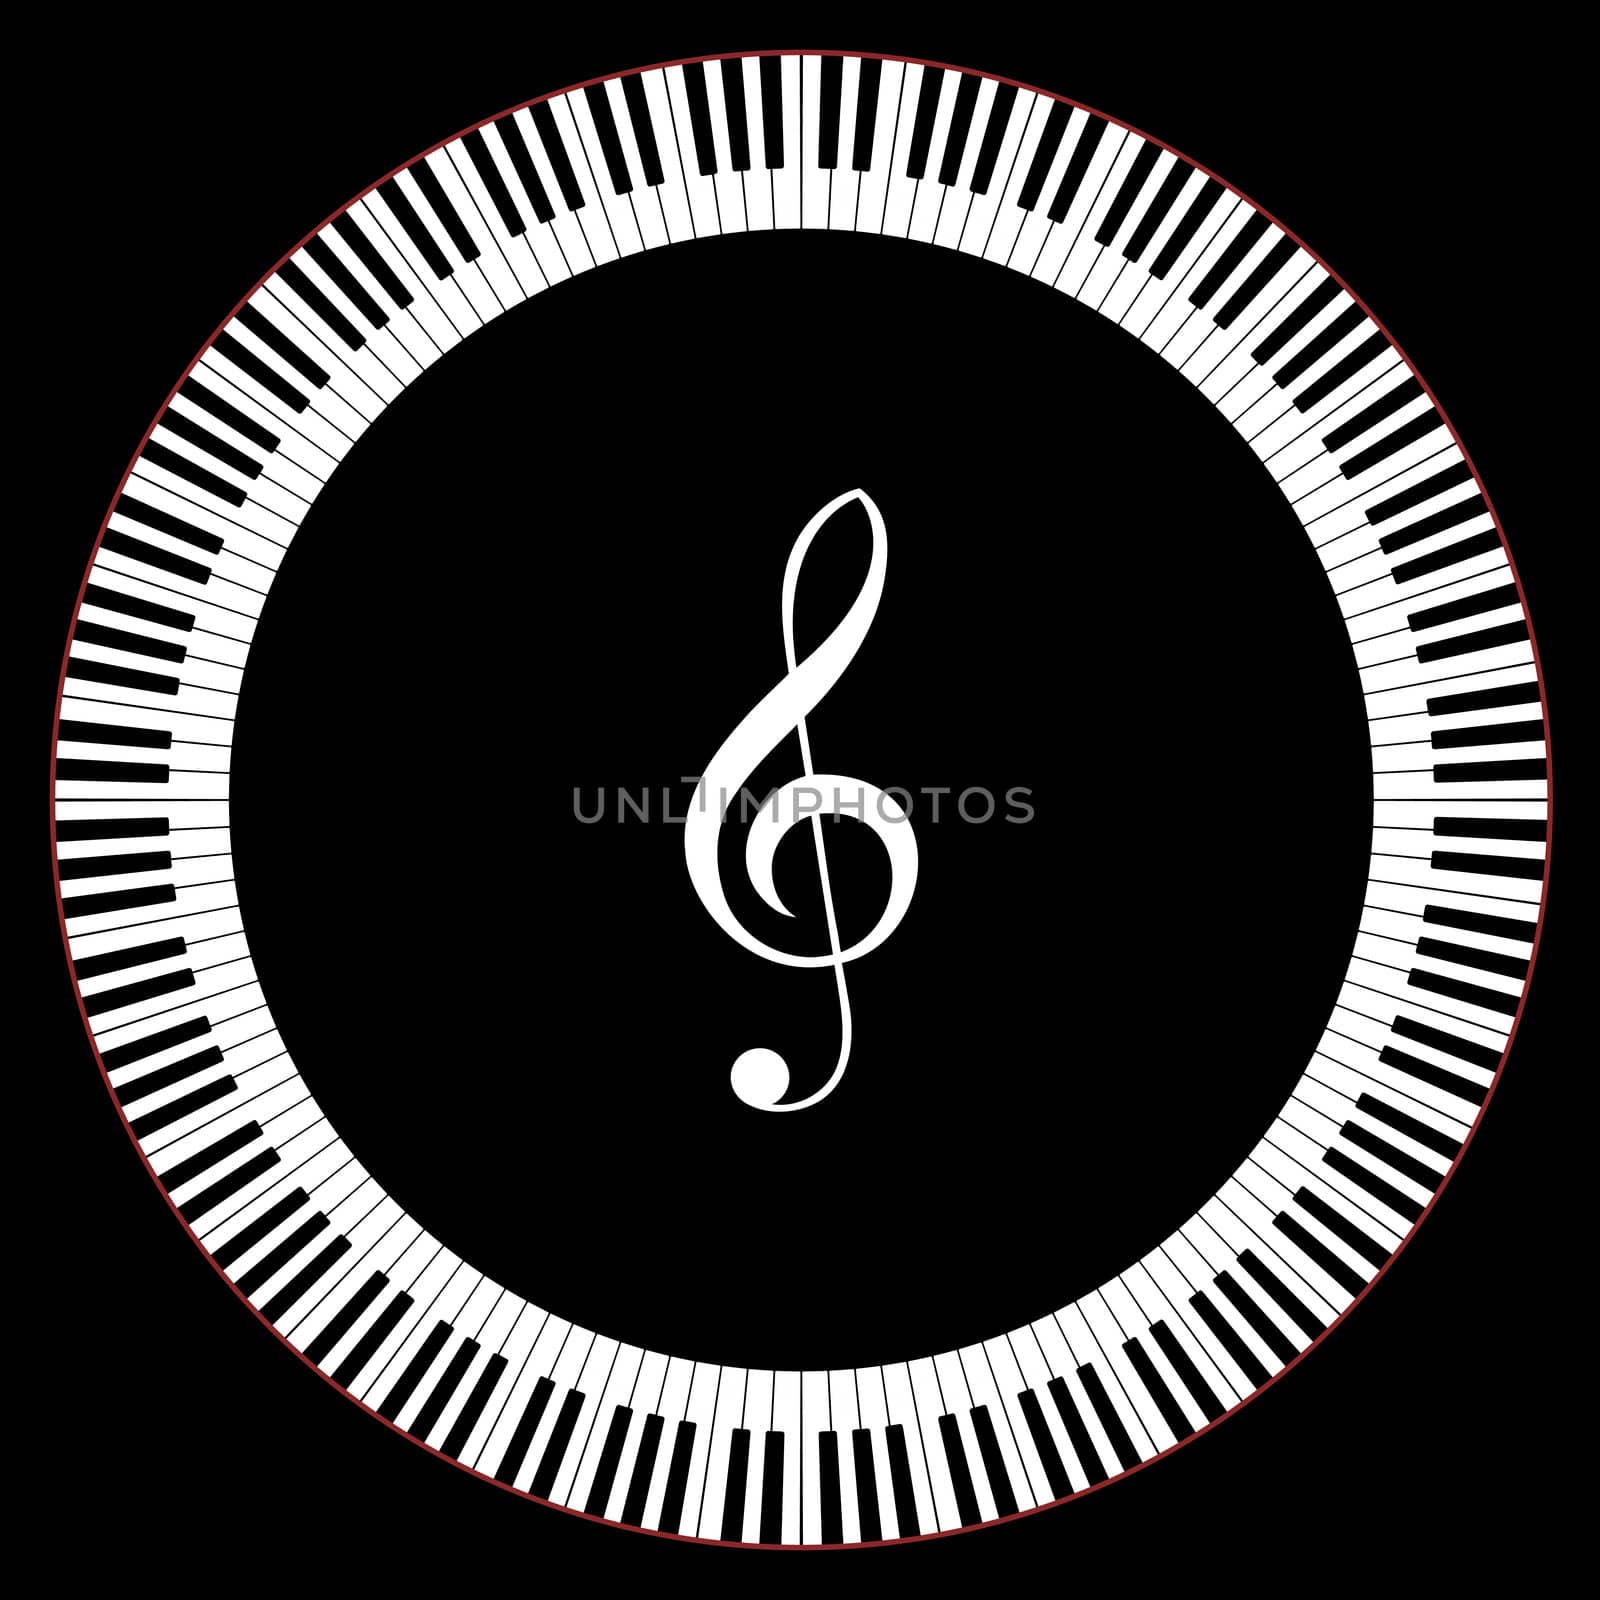 Circle of Piano Keys by bmelo